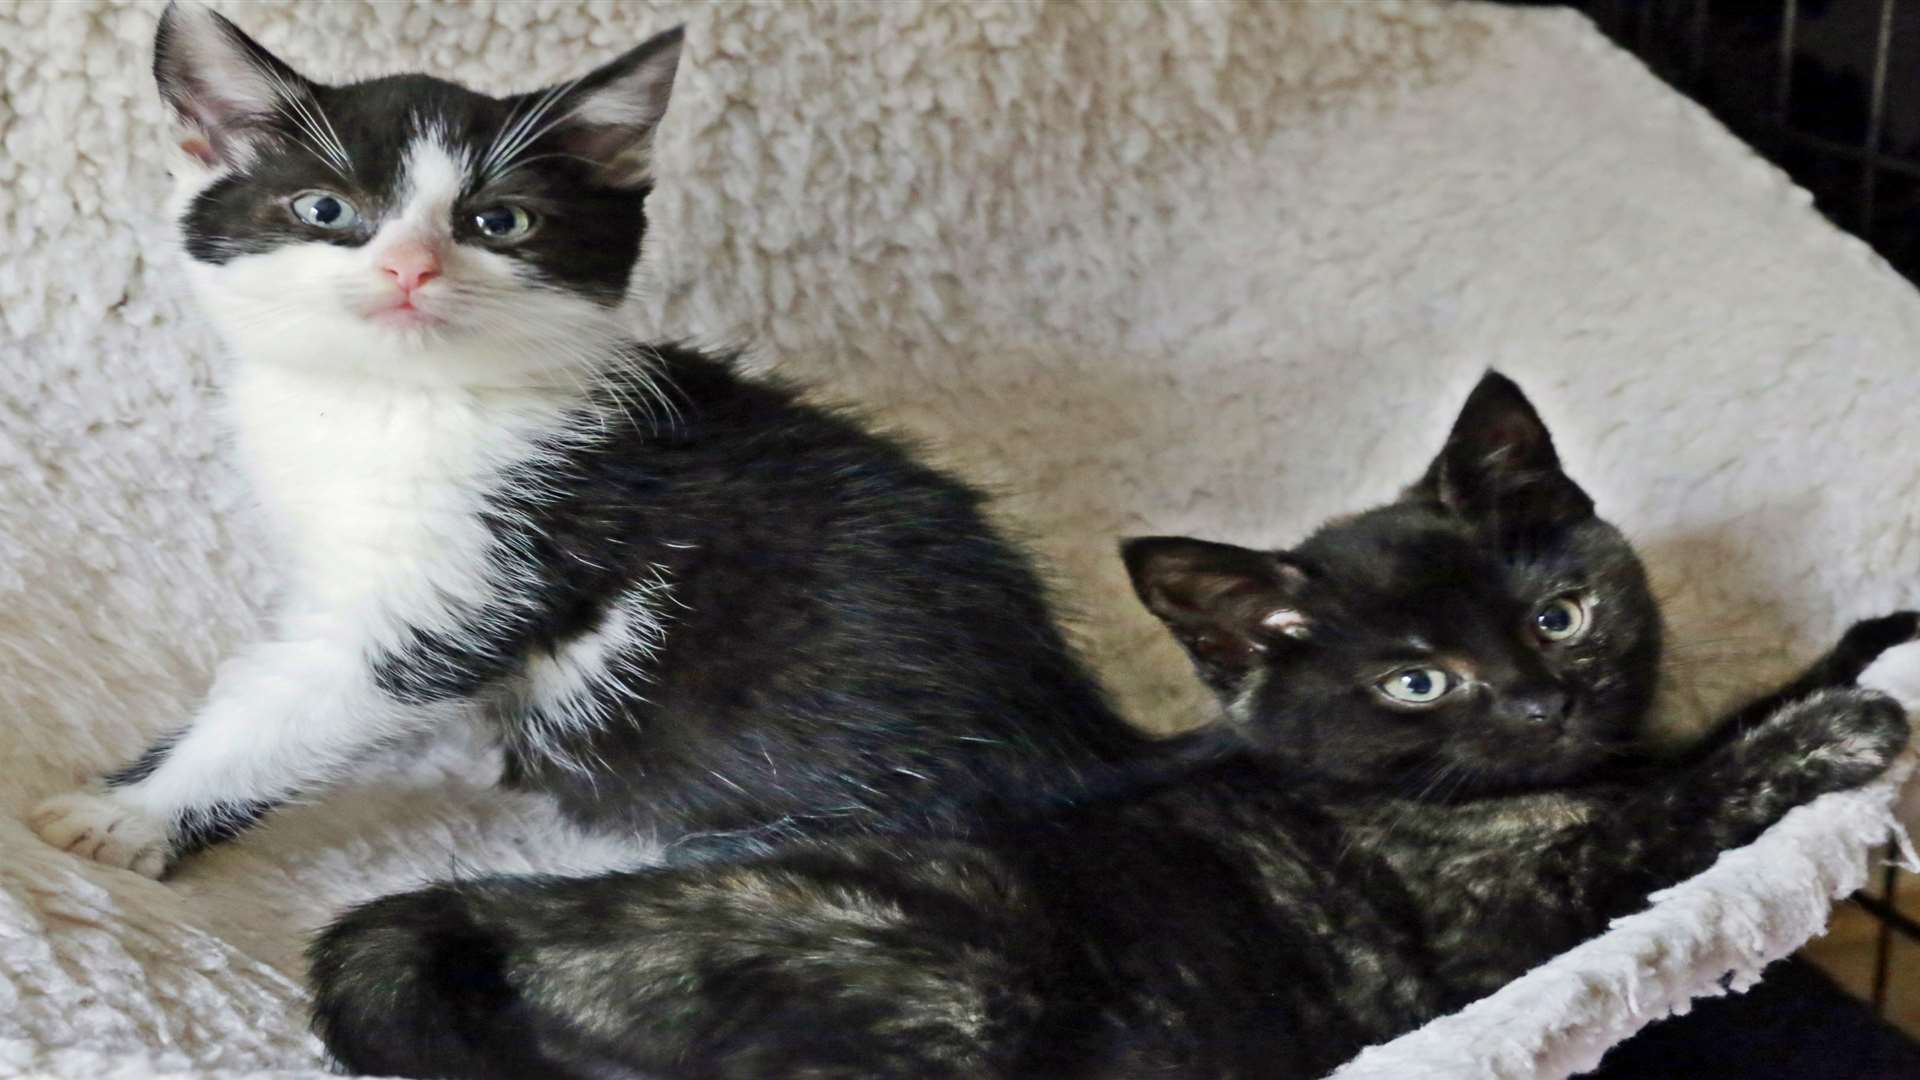 Tristan and Isolde are looking for a new home.